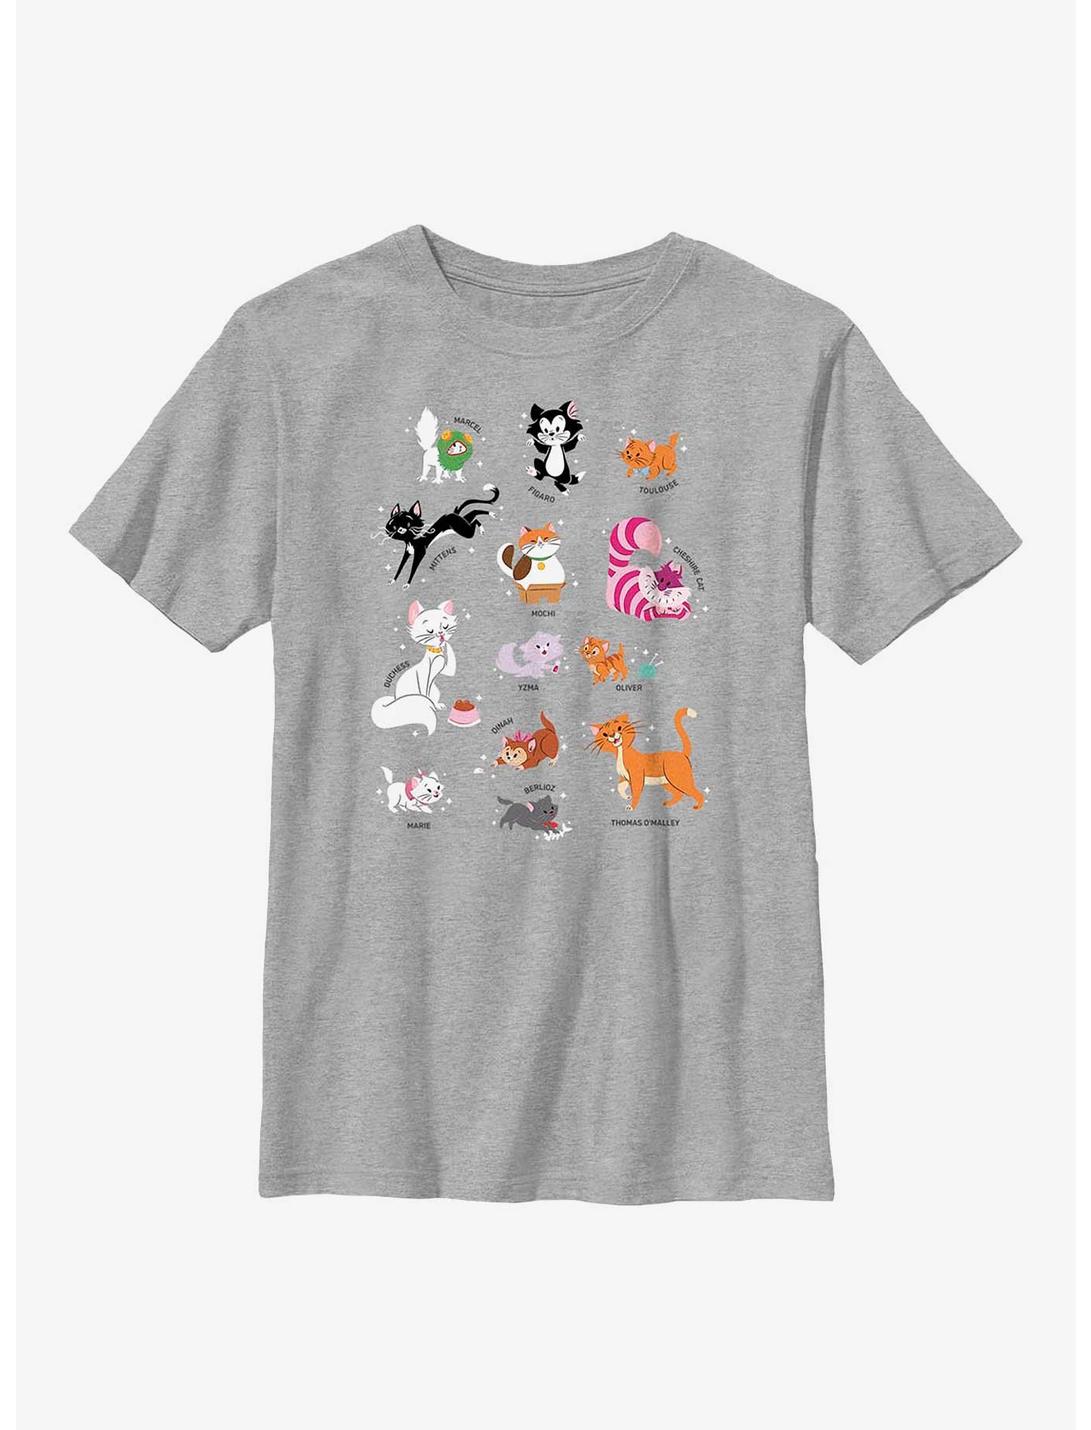 Disney Channel Cats of Disney Youth T-Shirt, ATH HTR, hi-res